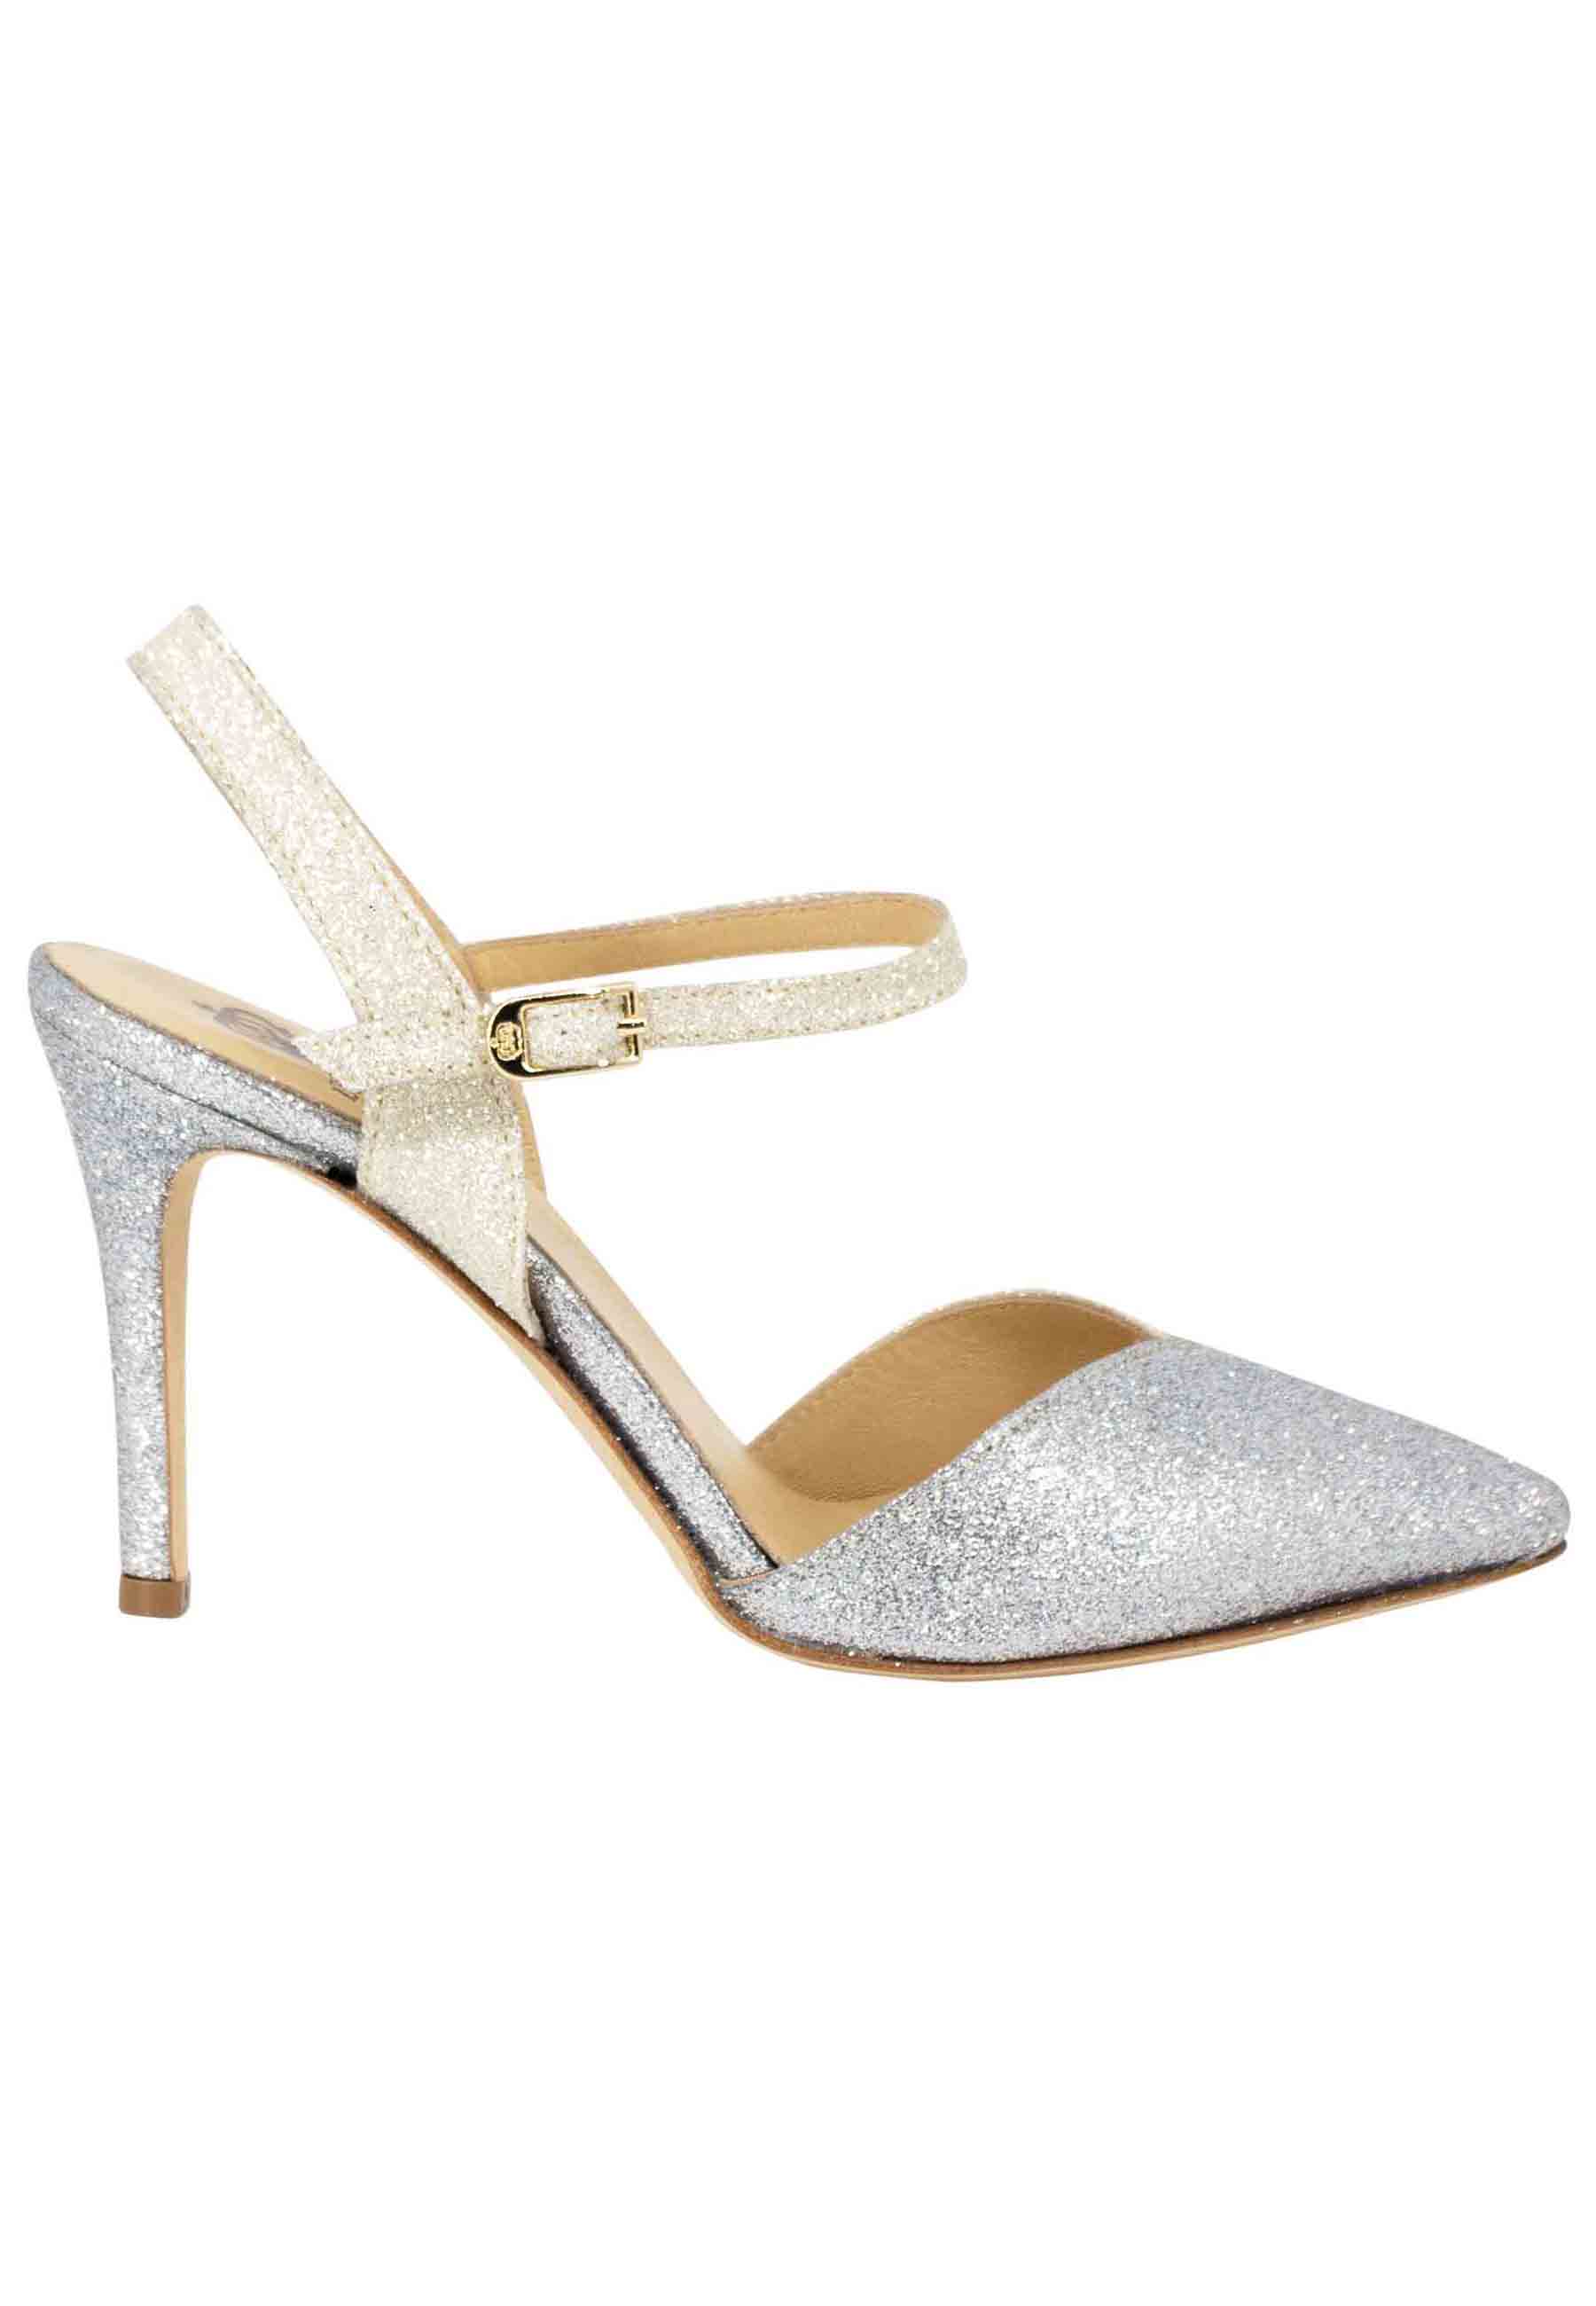 Women's silver glitter sandals with ankle strap